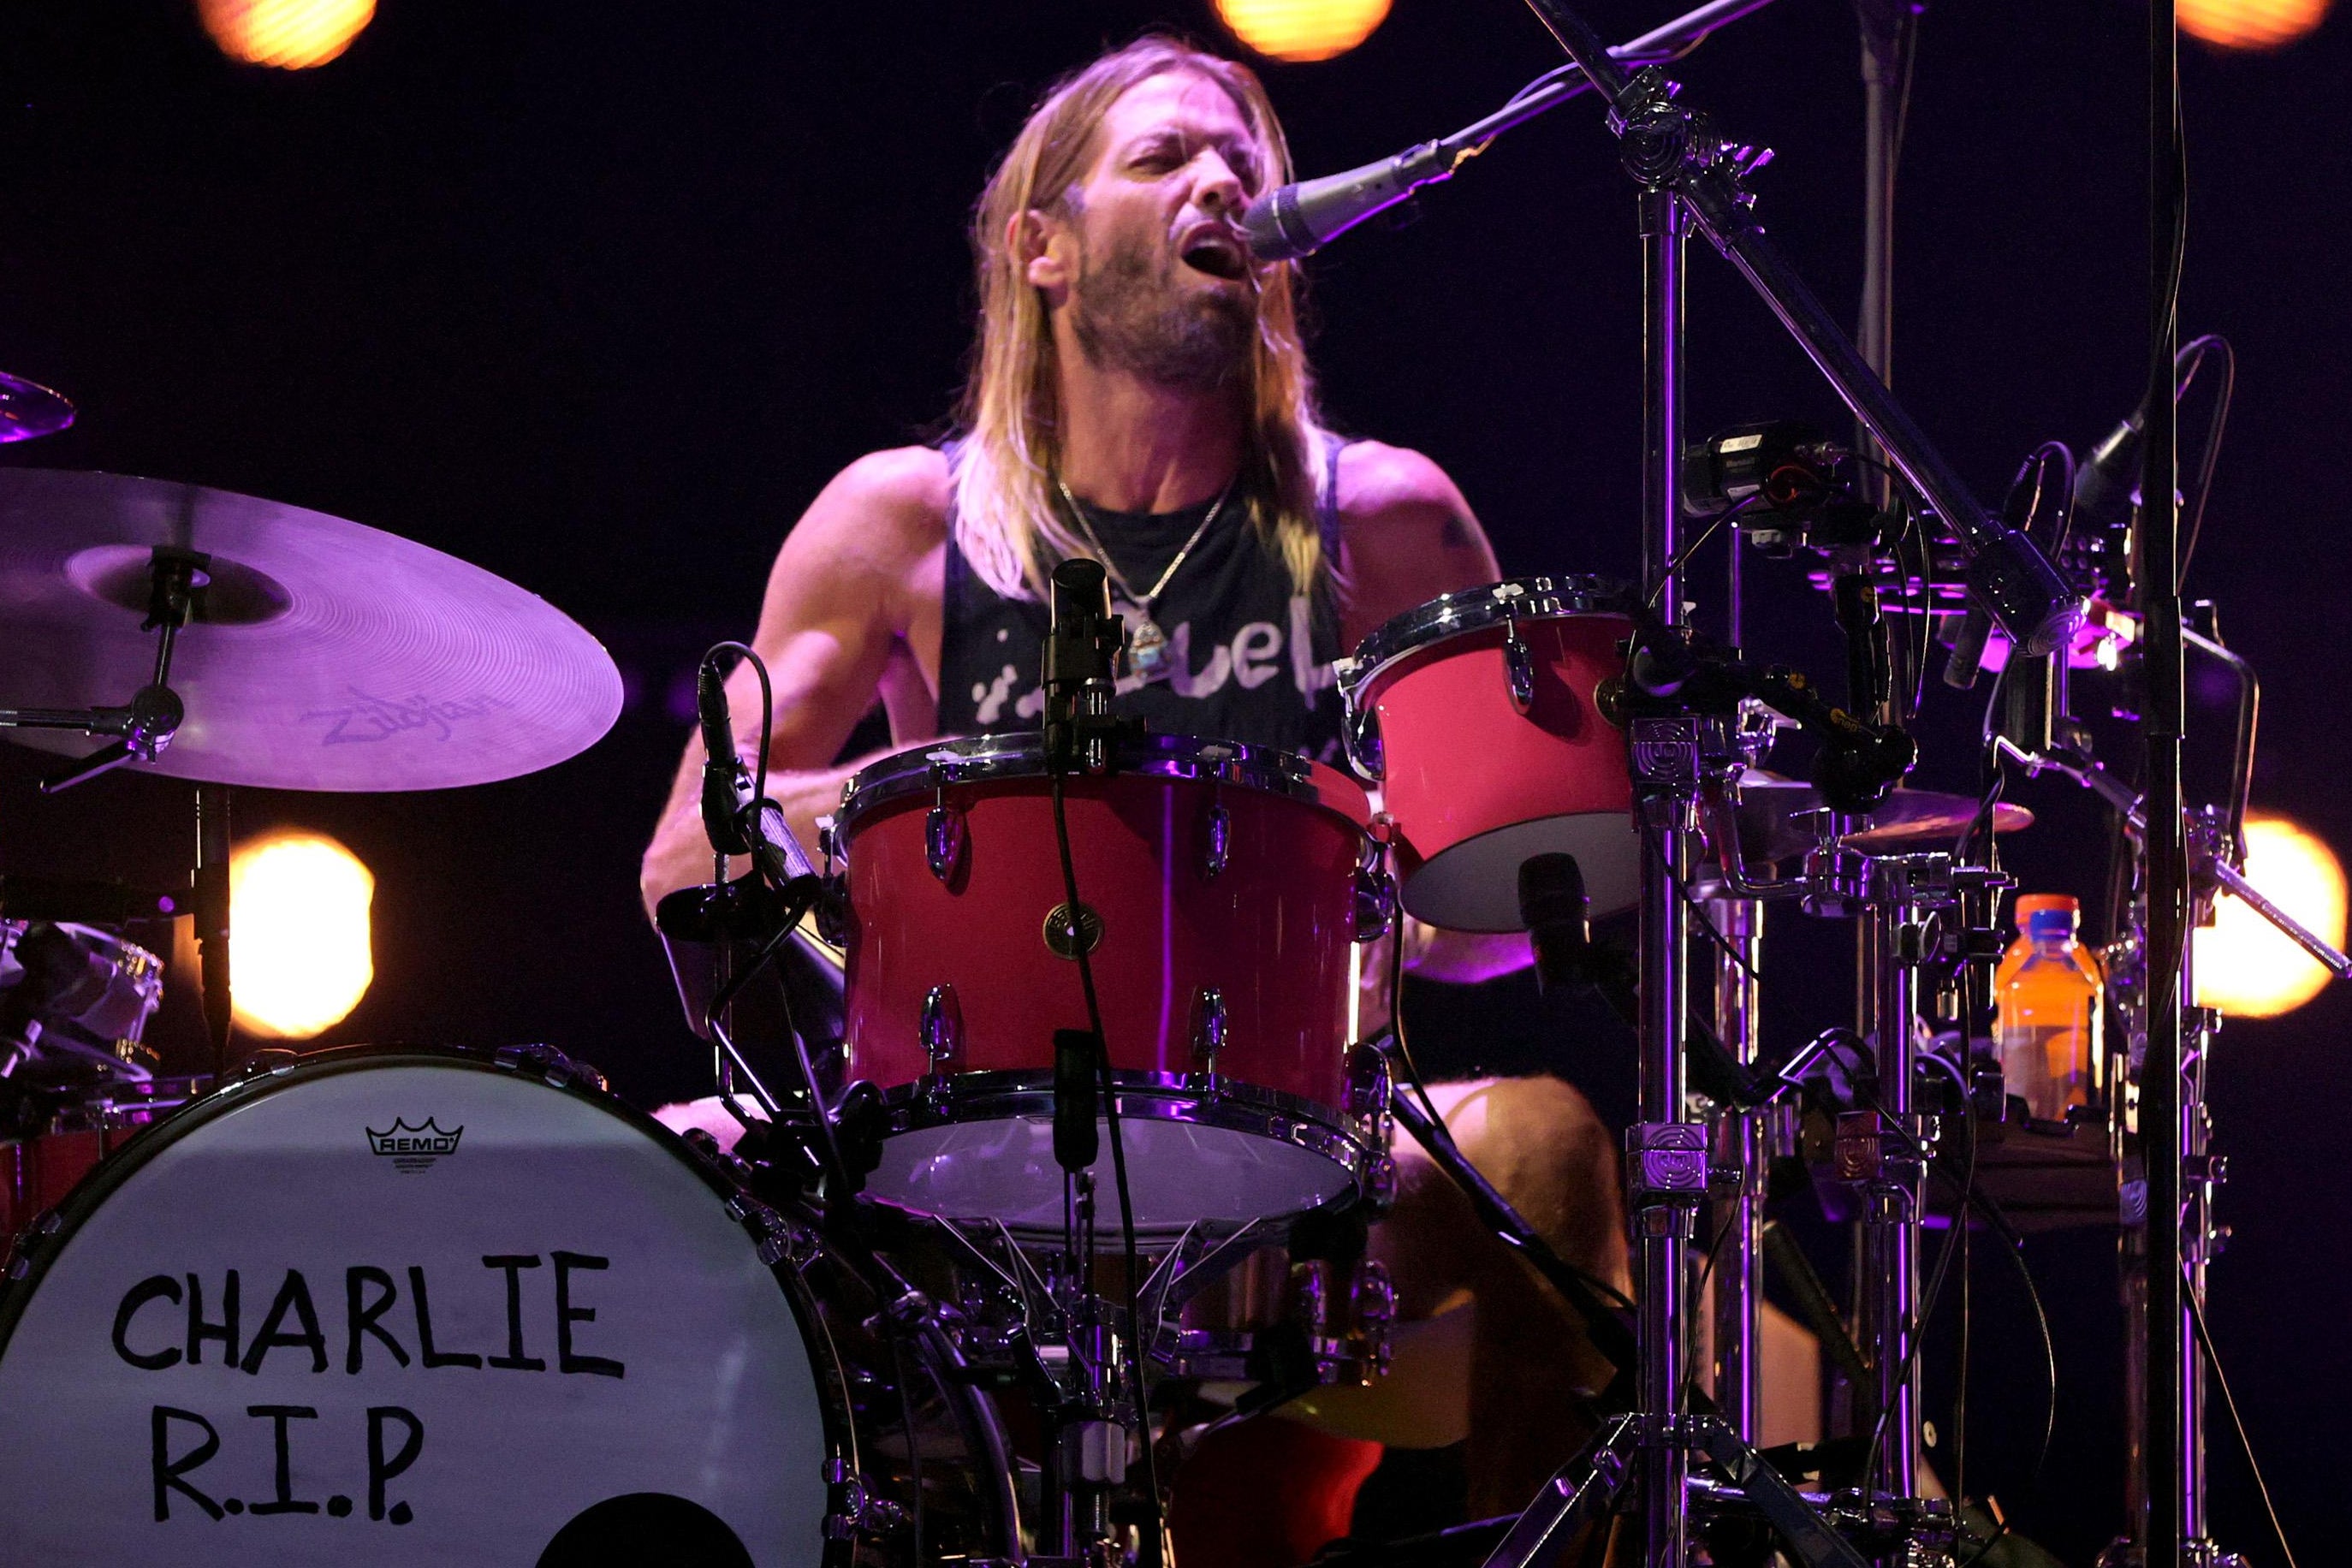 Taylor Hawkins of Foo Fighters performs onstage during the 2021 MTV Video Music Awards at Barclays Center on September 12, 2021 in the Brooklyn borough of New York City.